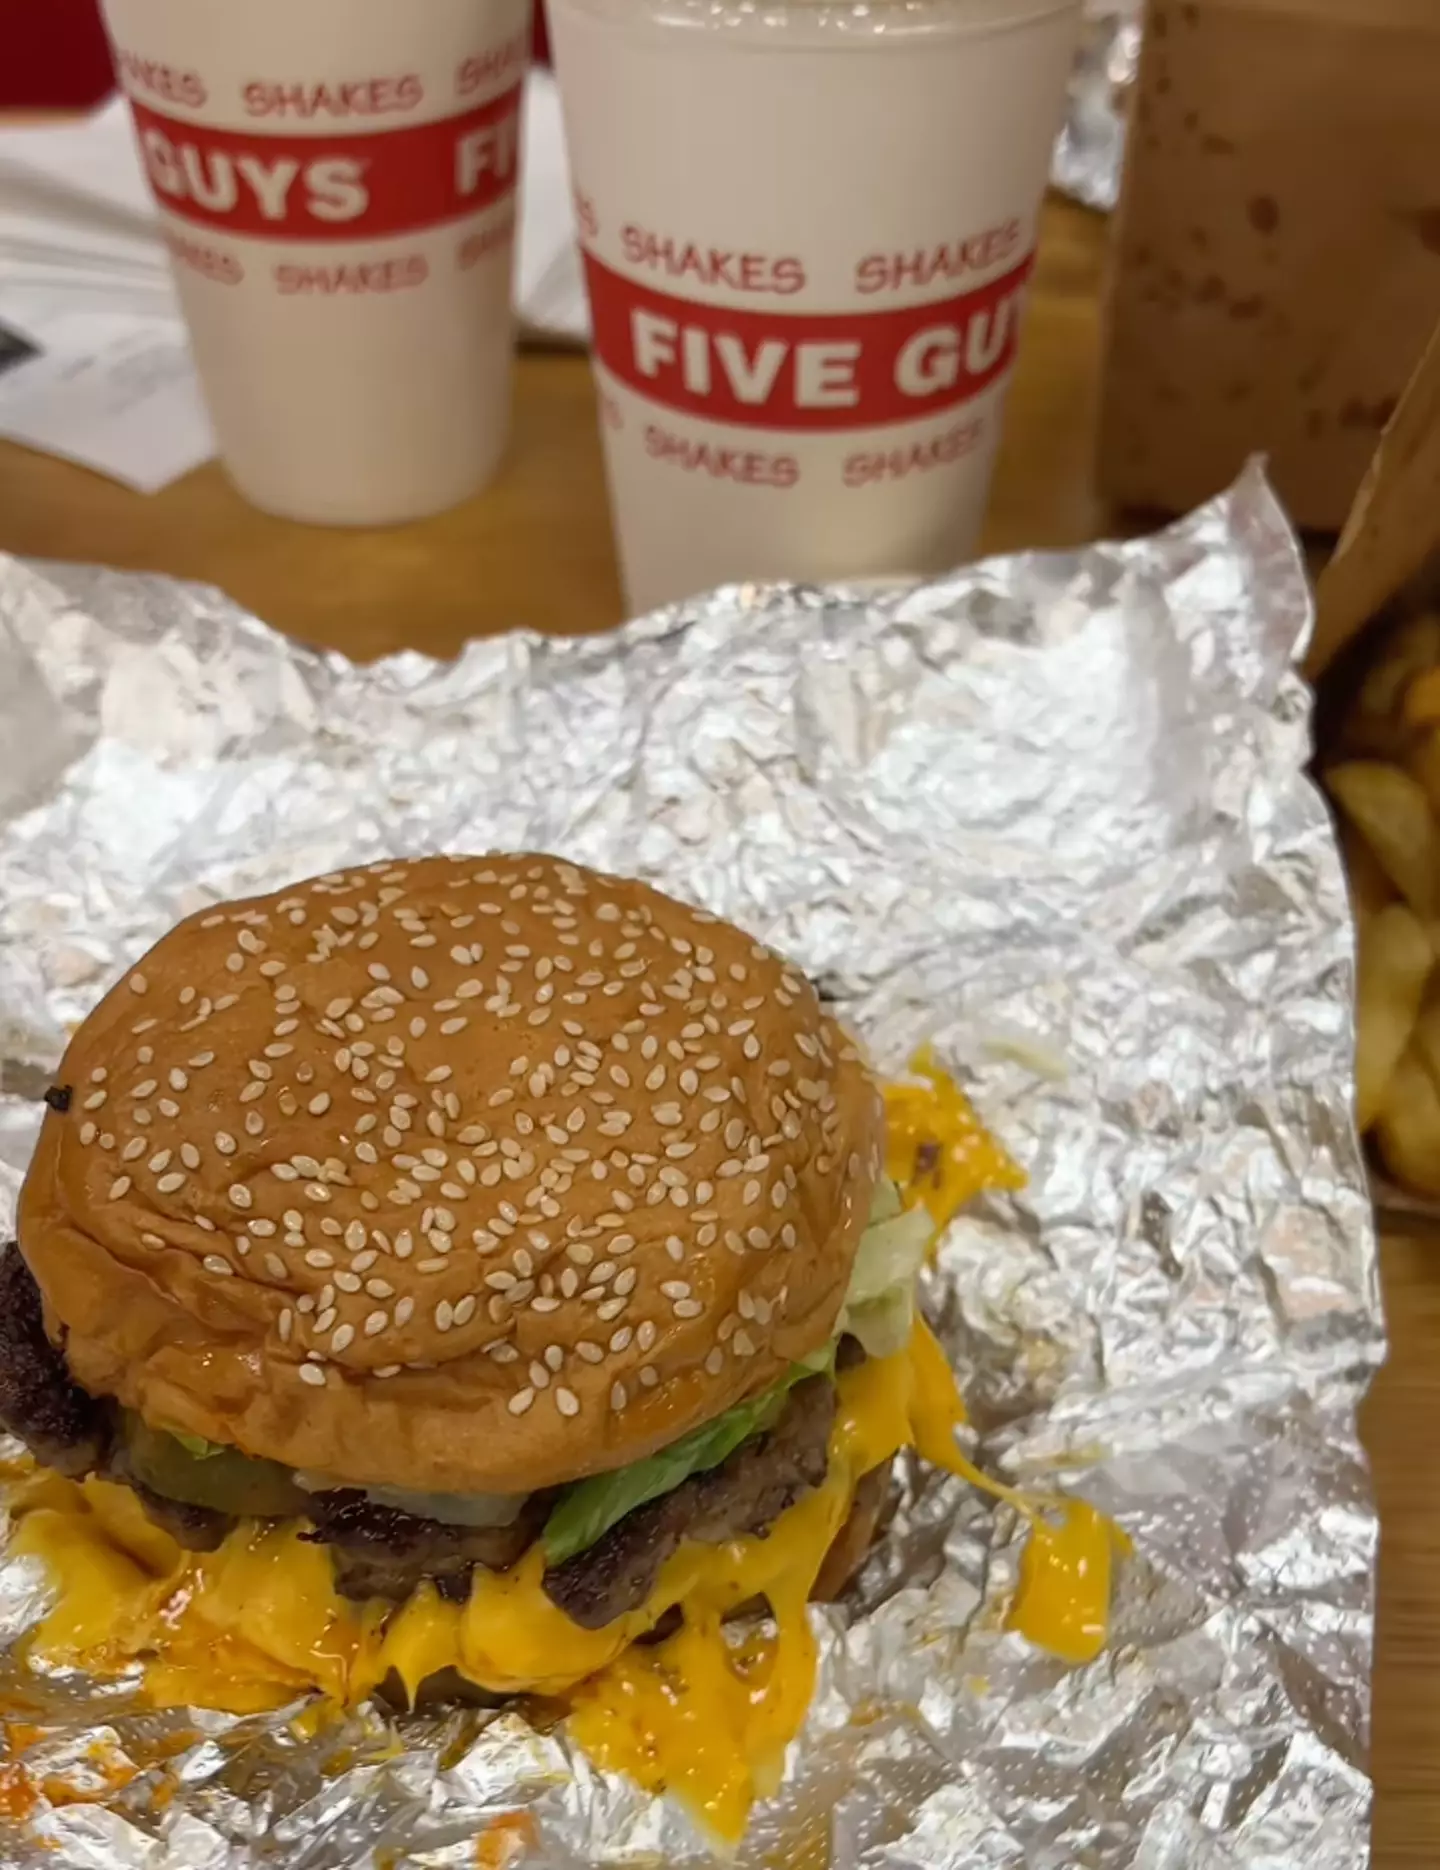 The price of a Five Guys meal has been heavily criticised by customers.